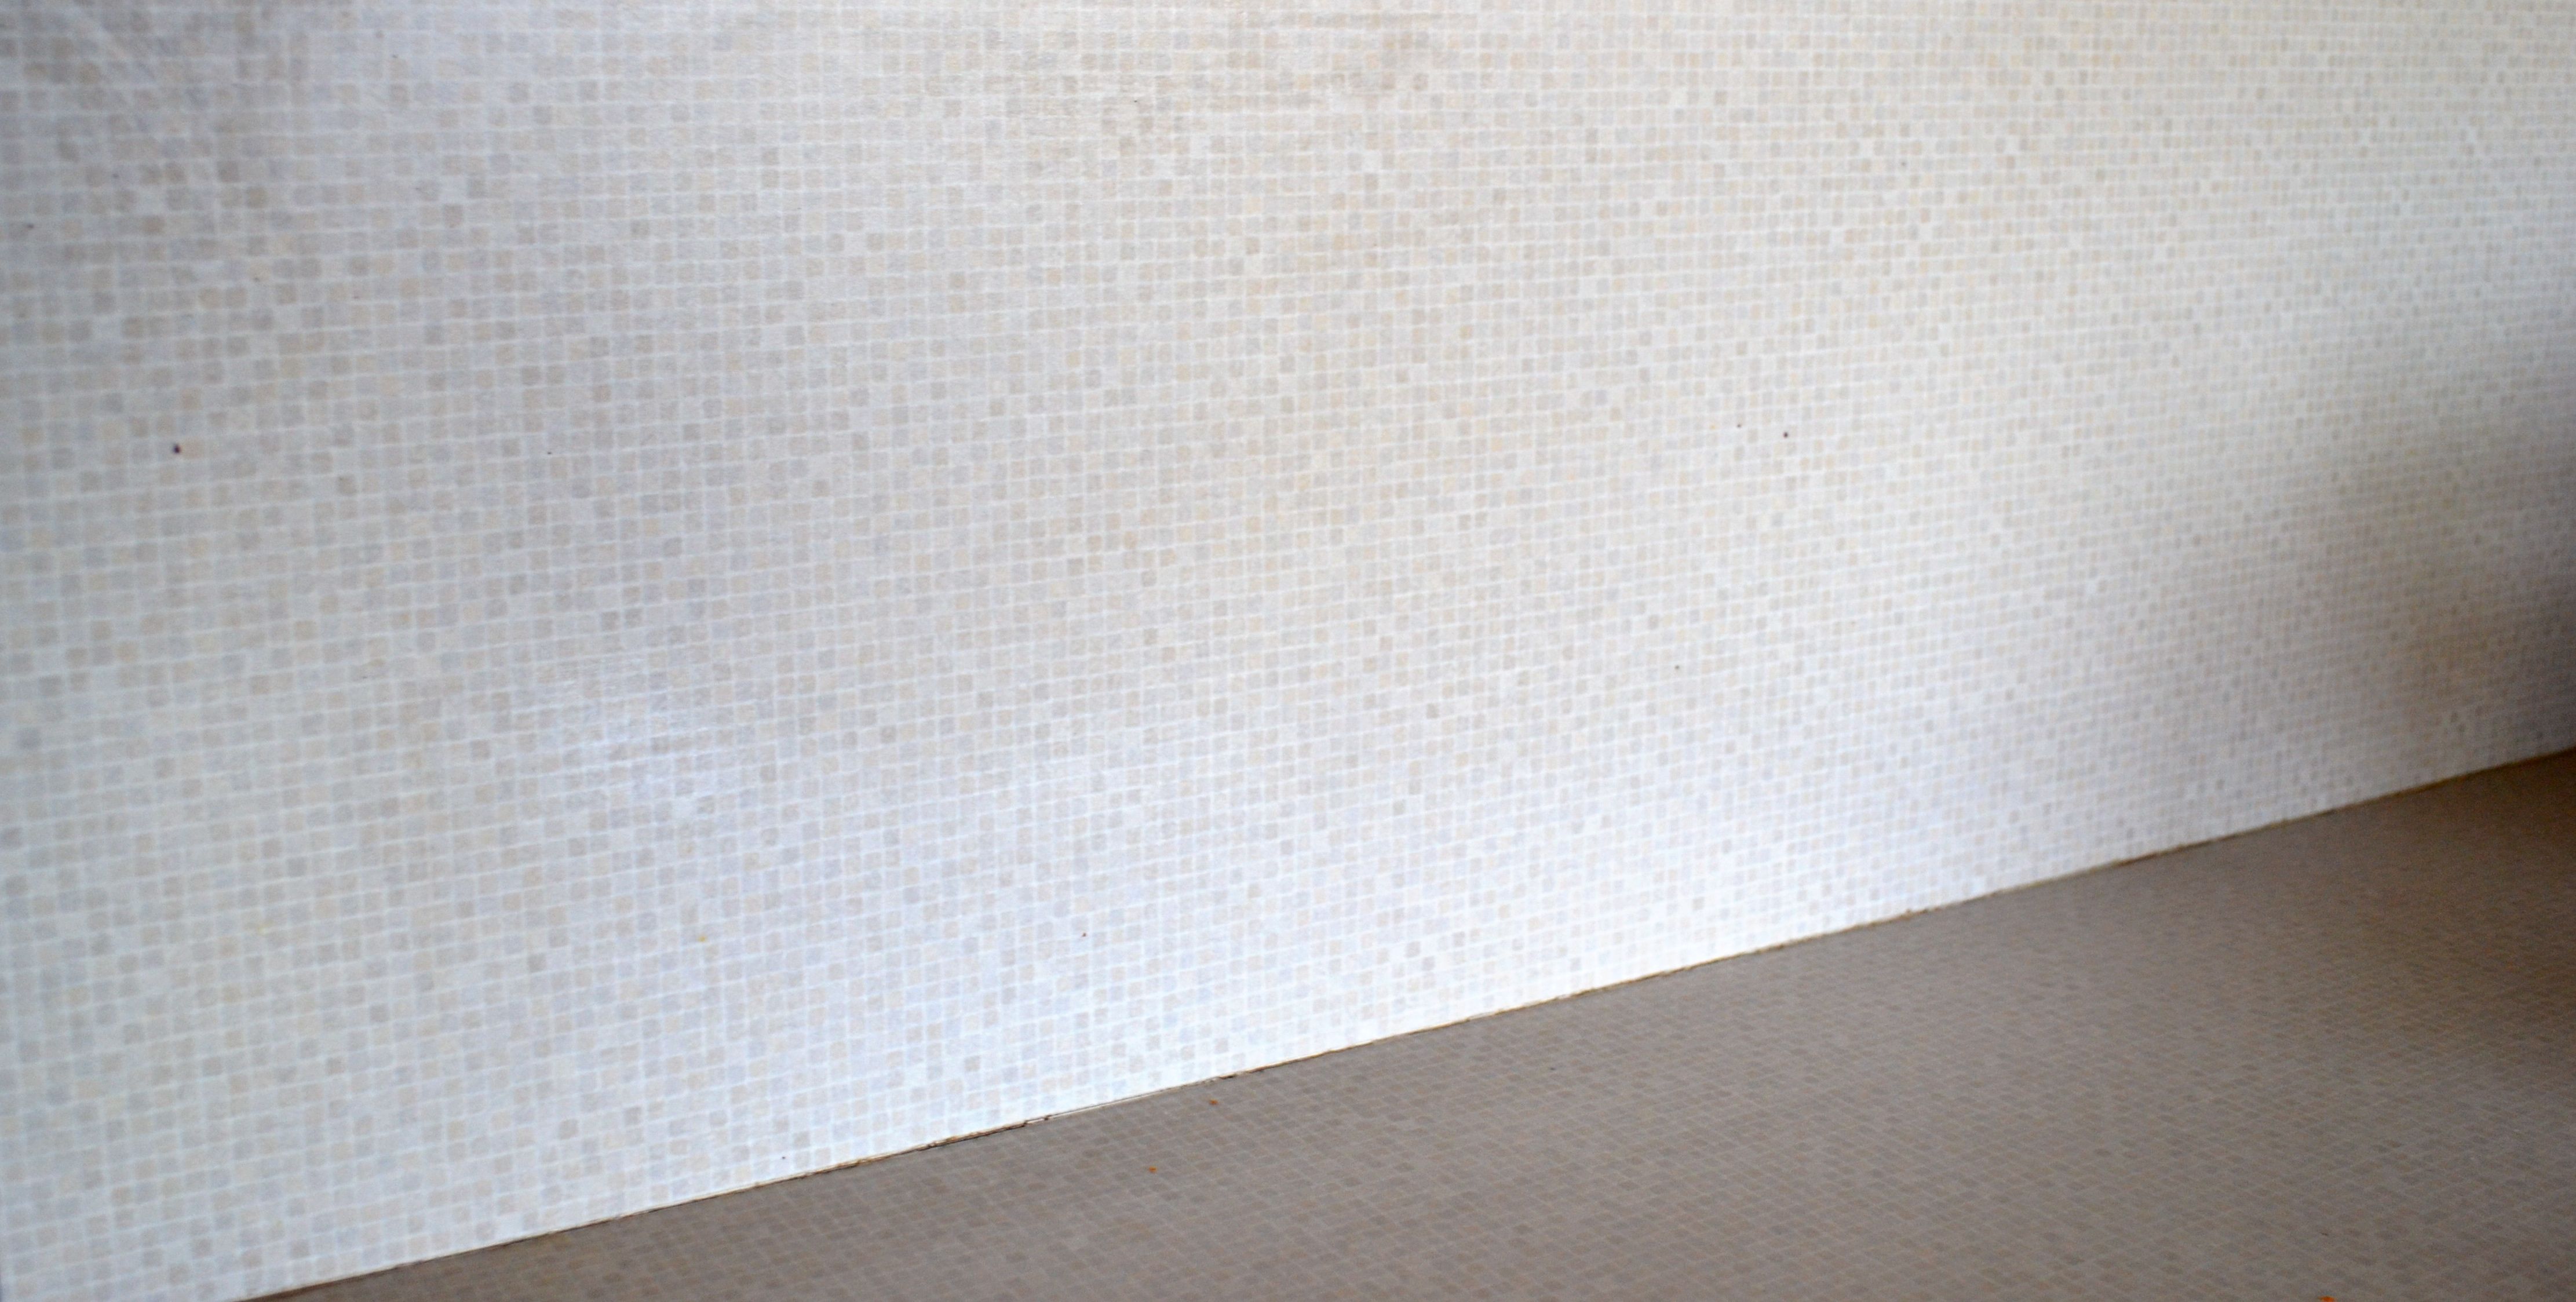 Contact Paper 'Tiled' Backsplash | My Goal is Simple